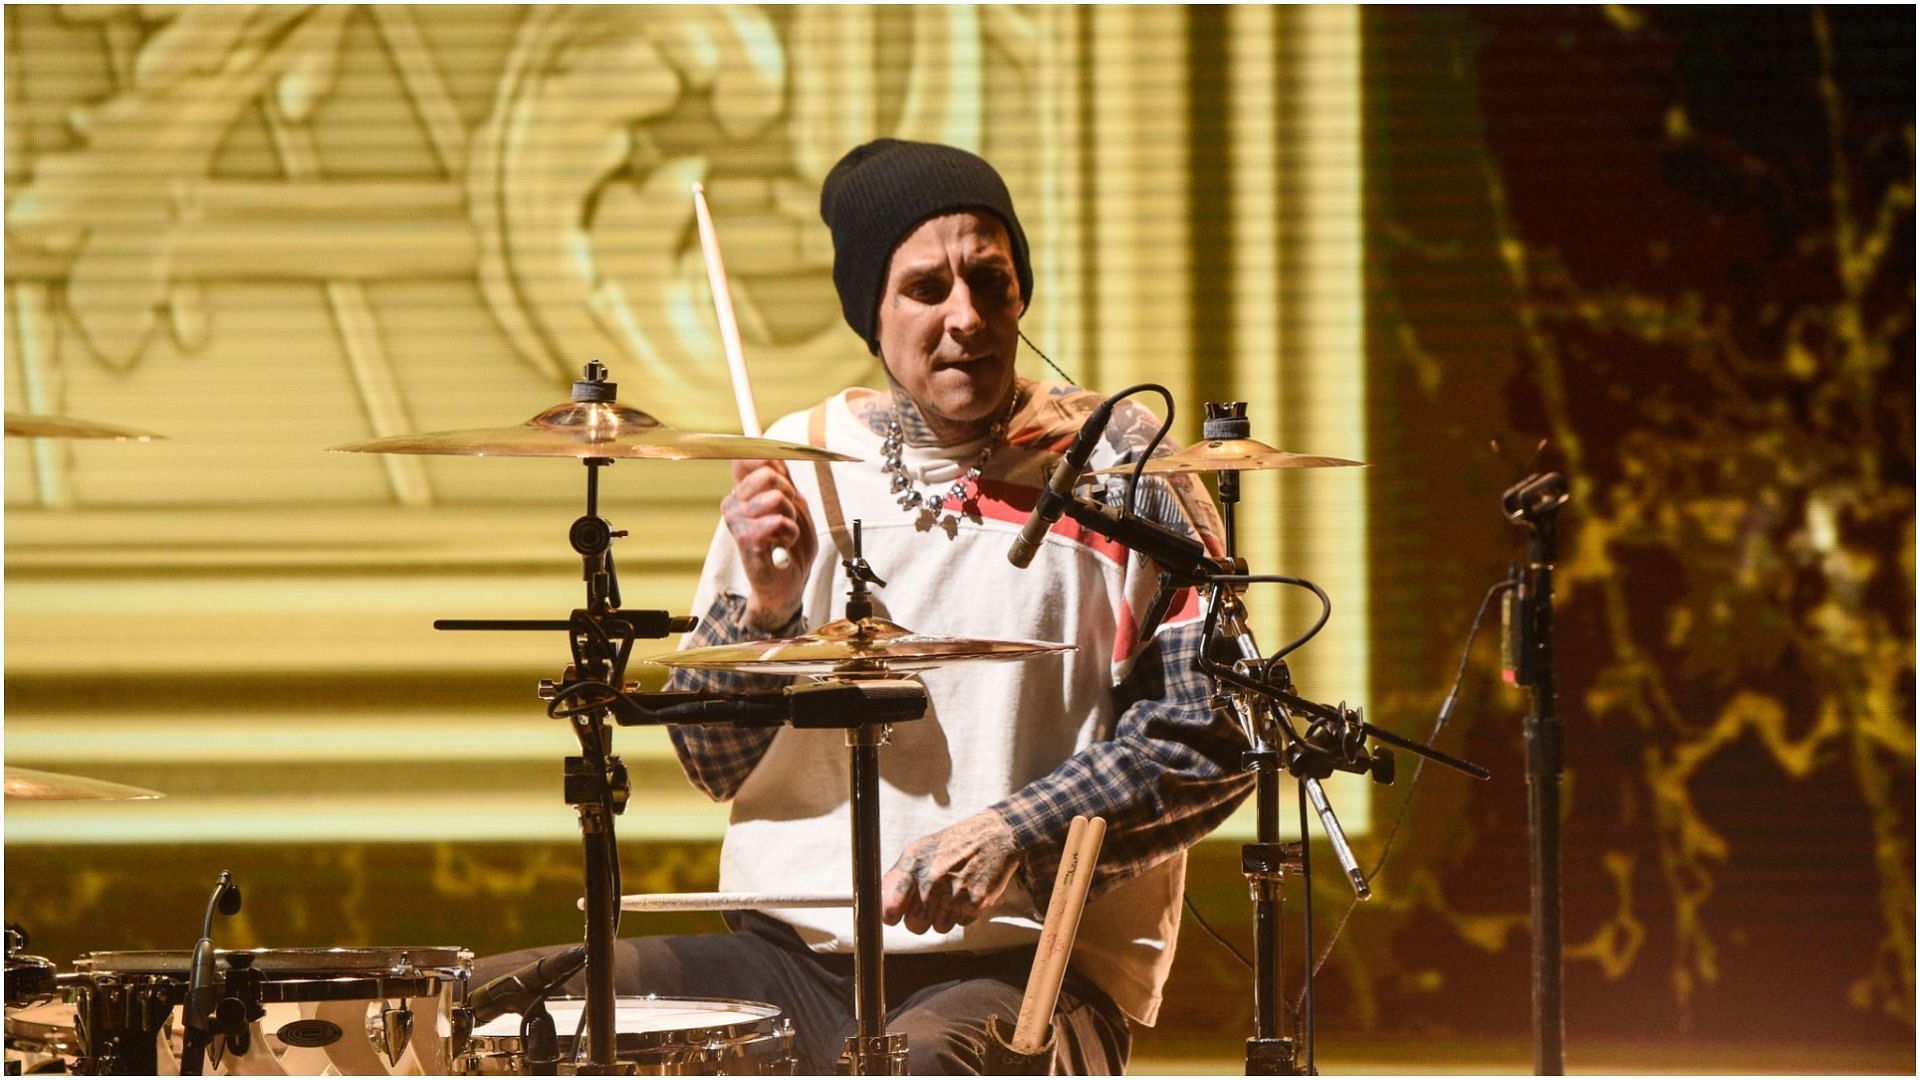 Travis Barker performs at the 2020 MTV Movie &amp; TV Awards: Greatest Of All Time broadcast on December 6, 2020 (Image via Getty Images)